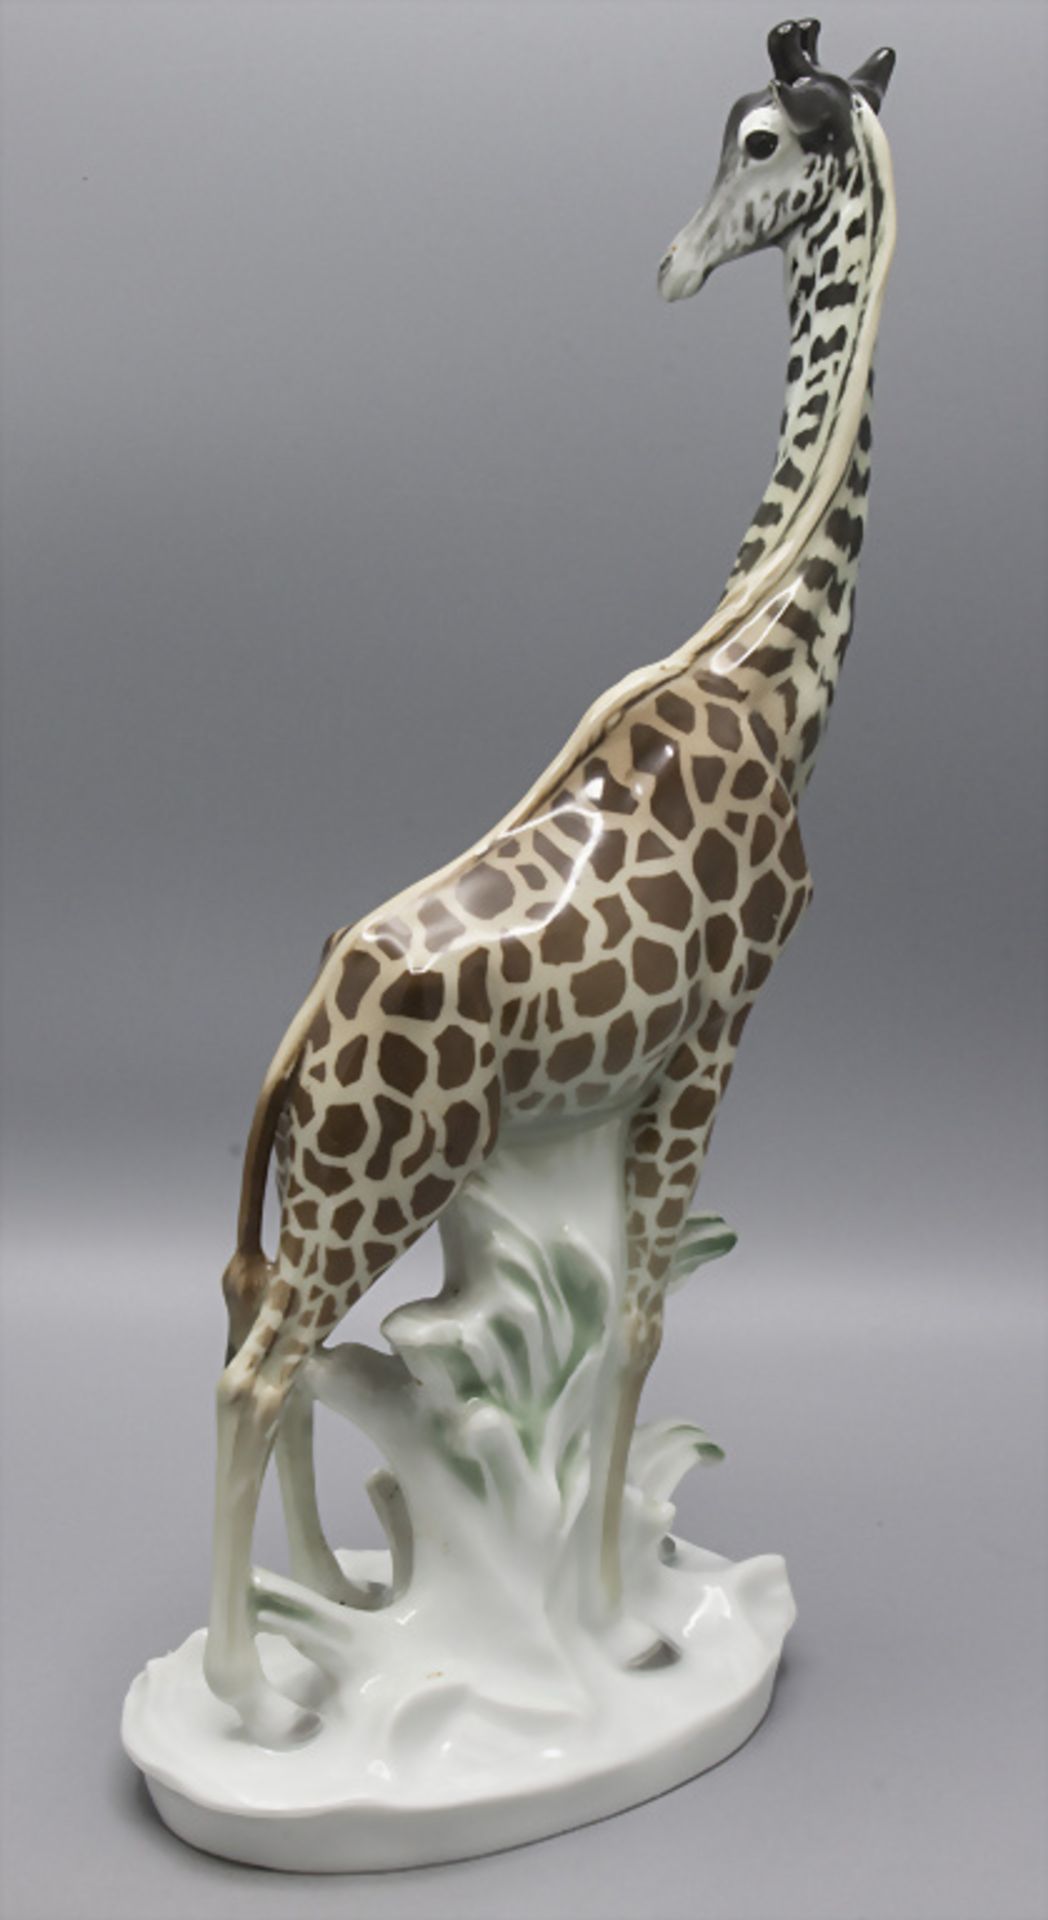 Große und sehr seltene Tierfigur 'Giraffe' / A large and very rare animal sculpture of a ... - Image 3 of 5